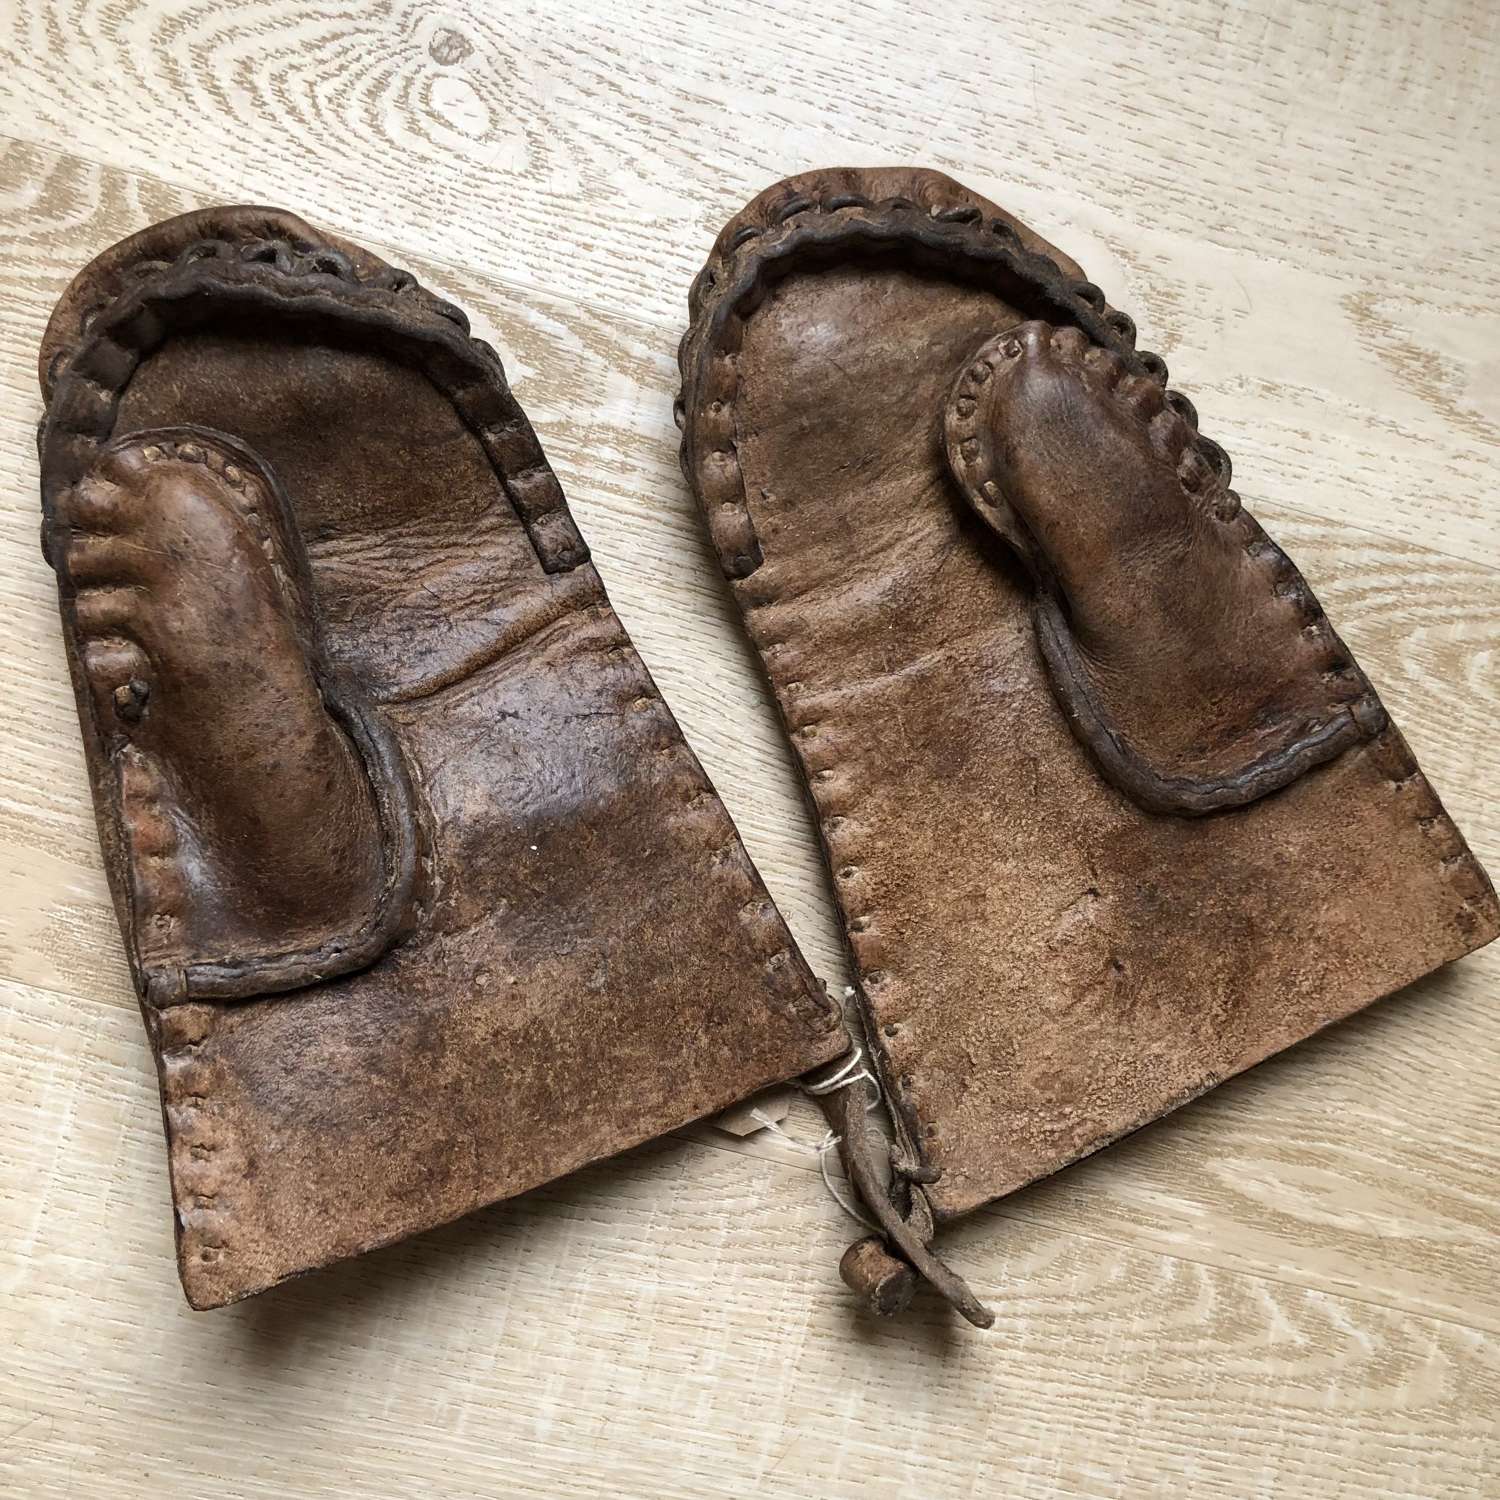 Pair of Antique Leather HEDGER'S MITTENS